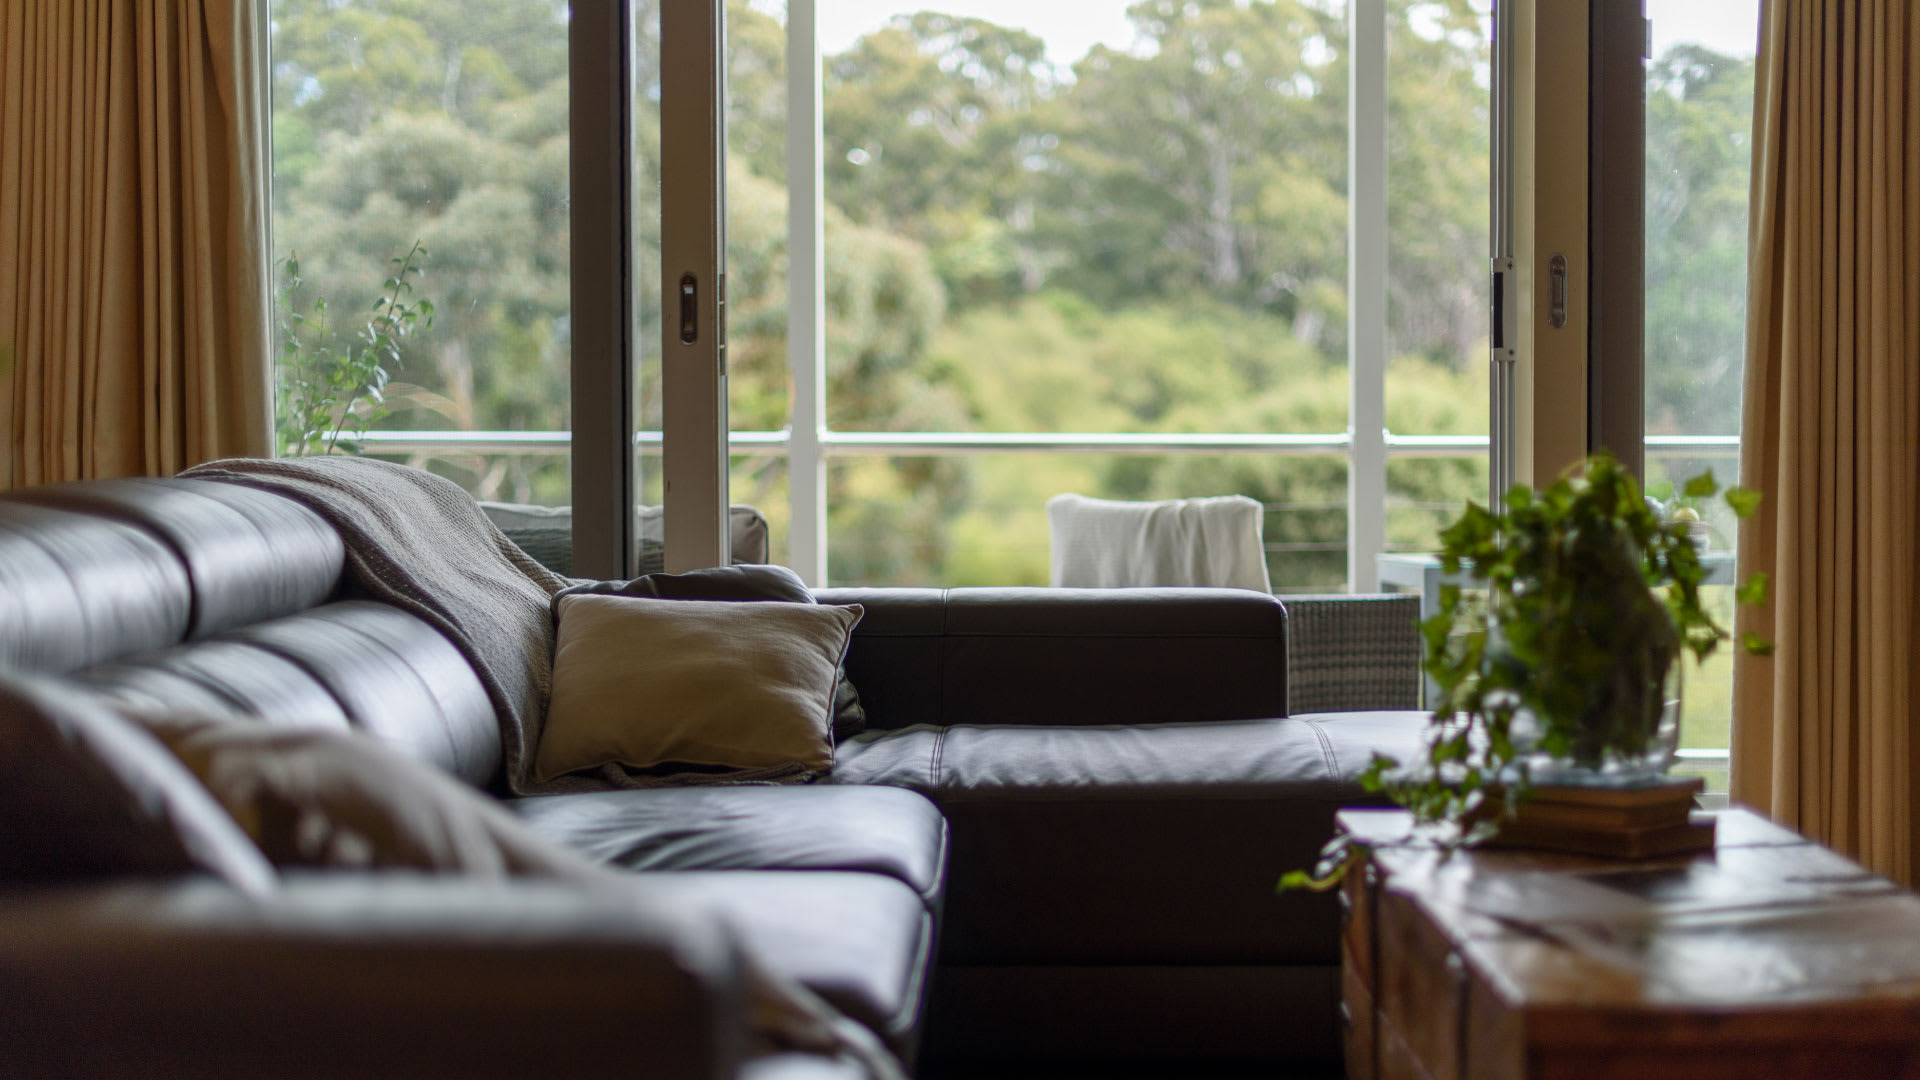 Lakeside Suite 3 | Daylesford | Image 013